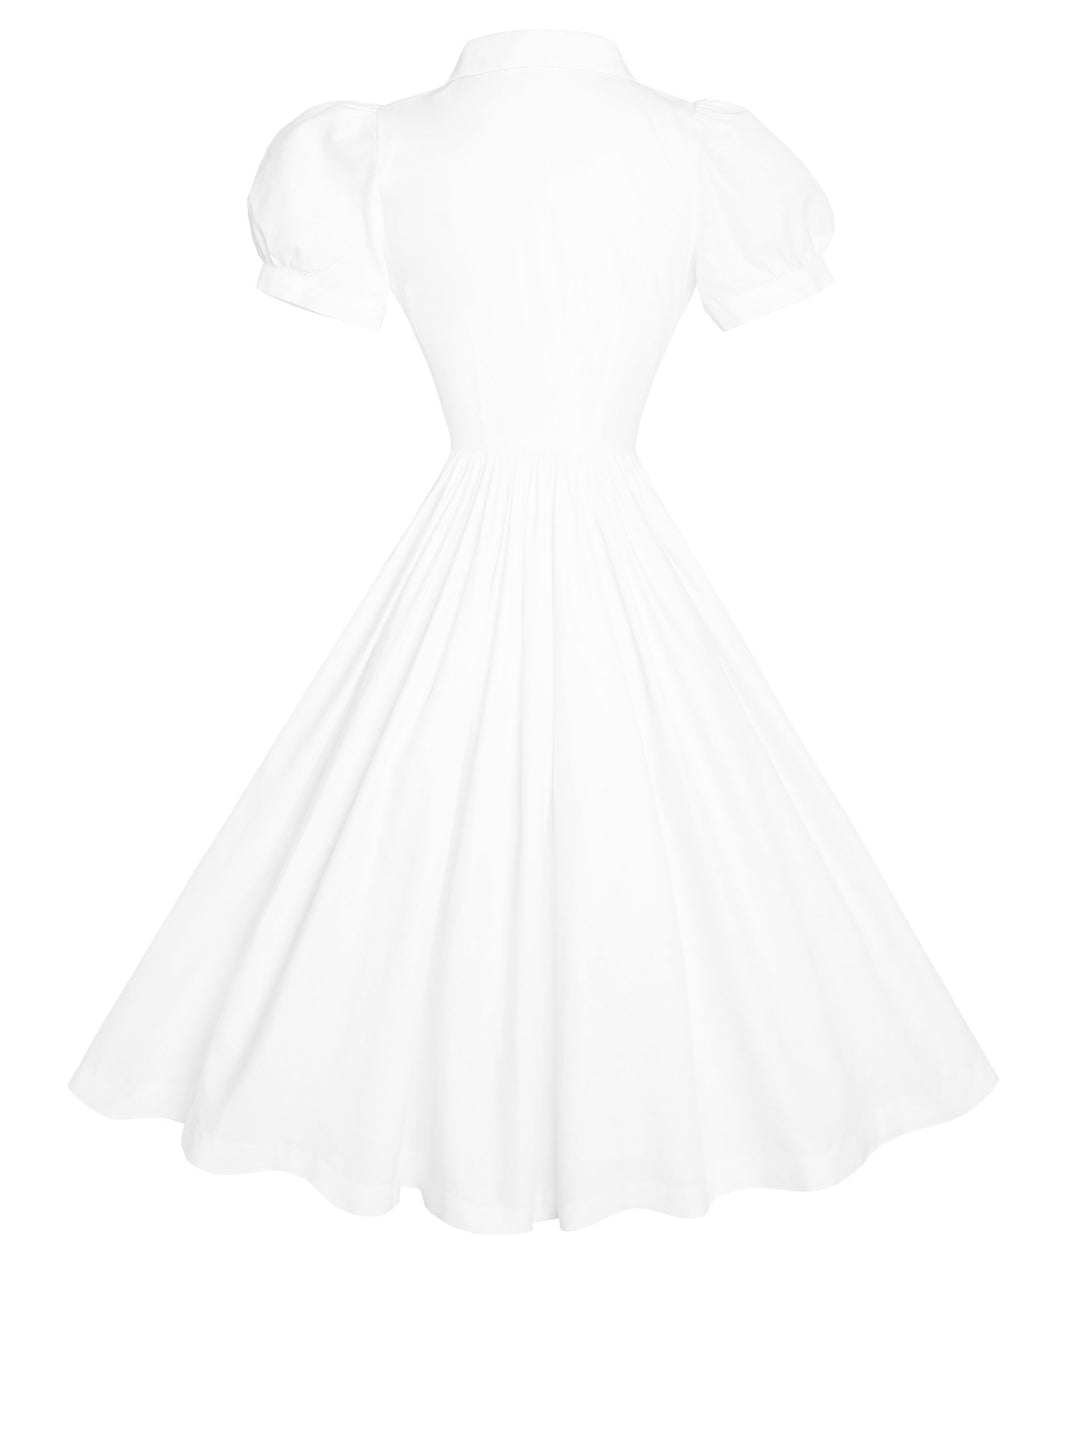 RTS - Size S - Amelie Dress in White Cotton